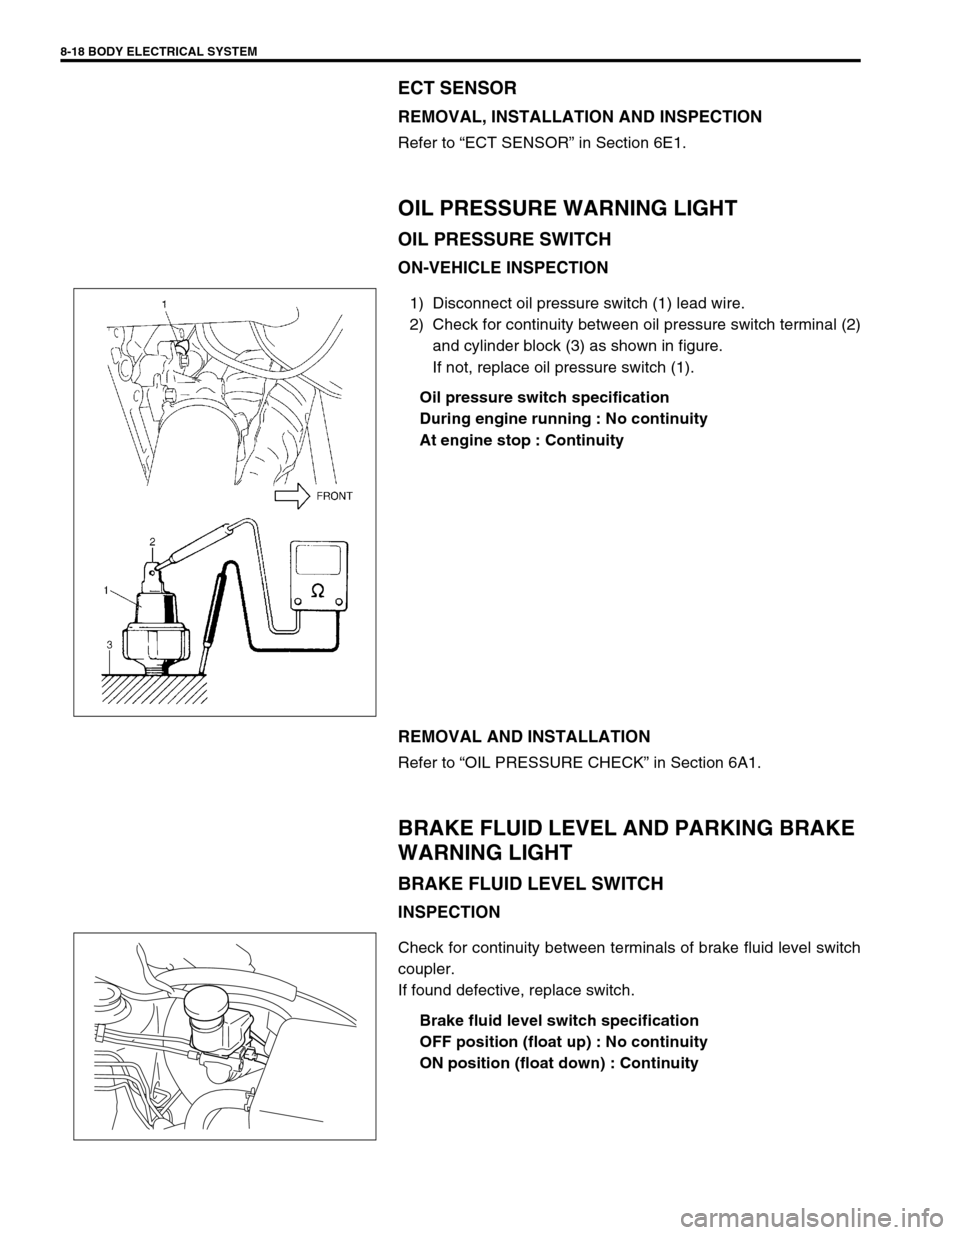 SUZUKI SWIFT 2000 1.G Transmission Service Service Manual 8-18 BODY ELECTRICAL SYSTEM
ECT SENSOR
REMOVAL, INSTALLATION AND INSPECTION
Refer to “ECT SENSOR” in Section 6E1.
OIL PRESSURE WARNING LIGHT
OIL PRESSURE SWITCH
ON-VEHICLE INSPECTION
1) Disconnect